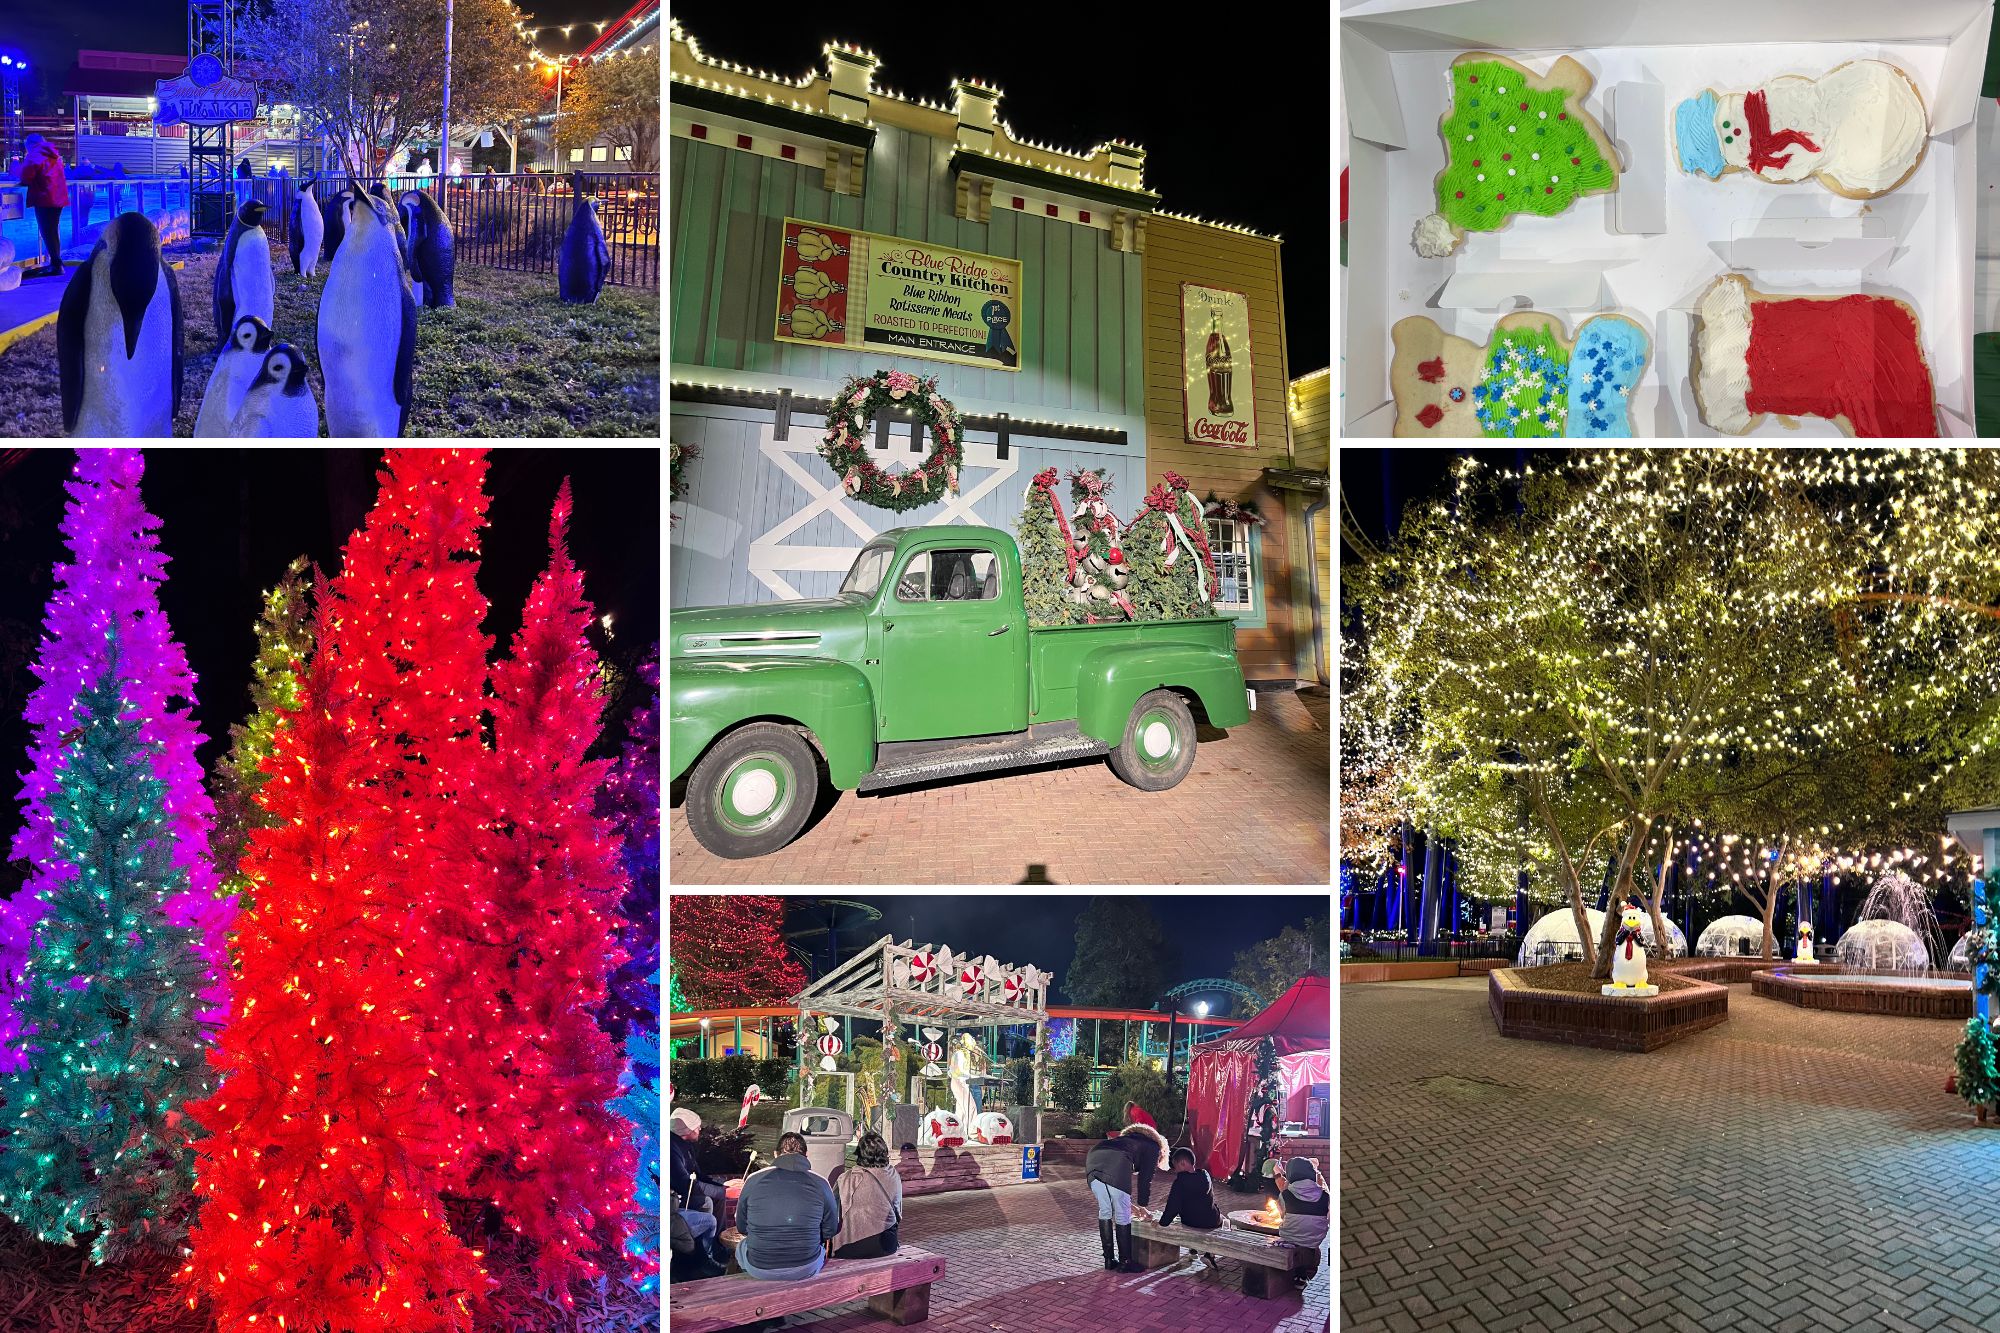 Collage of images from Carowinds' WinterFest in 2022